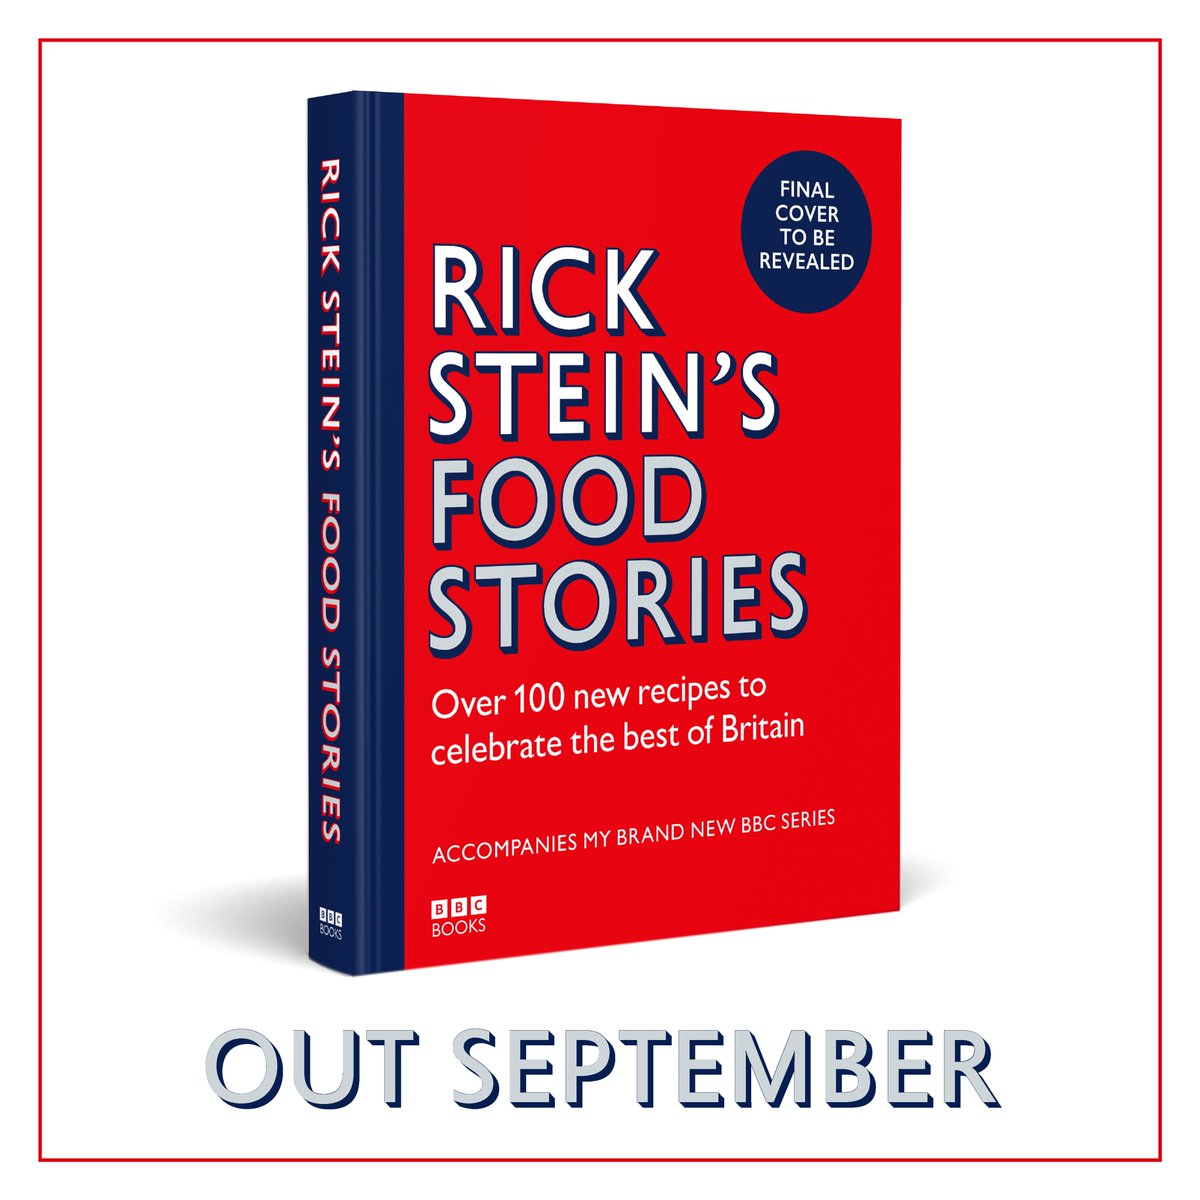 Pre-order a signed copy of Rick Stein's Food Stories 📚 Accompanying his current BBC series, Rick's new cookery book has over 100 recipes inspired by travels around the country and will be published in September. Pre-orders are now available here: tinyurl.com/mstn9nj8